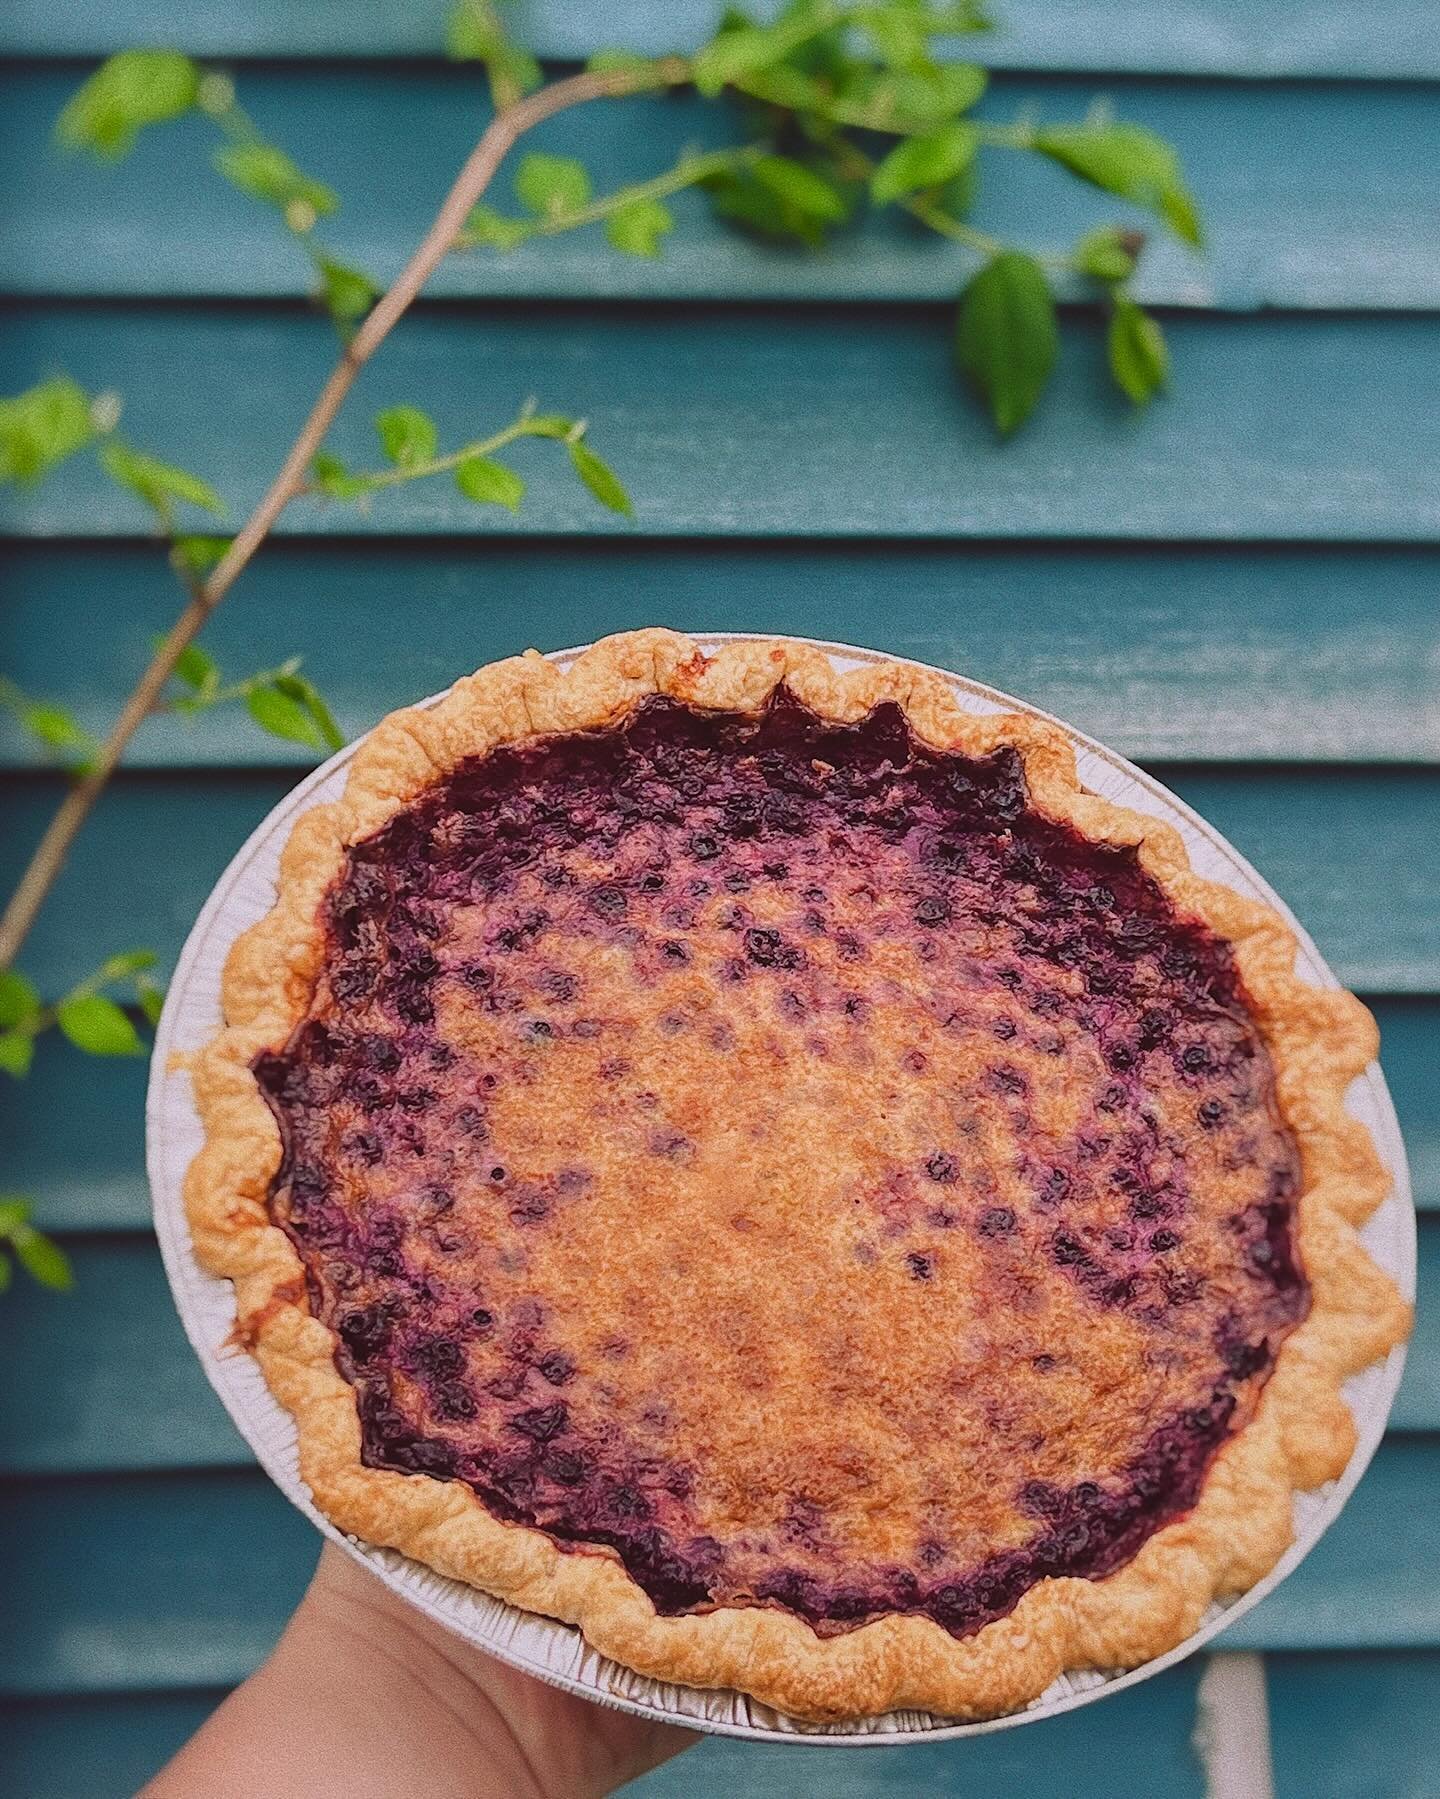 Happy Sunday! Look at these stunning Blueberry Lemon Chess pies we&rsquo;ve got in the shop today! 🫐🍋
&bull;
We&rsquo;re here until 6 with all the tasty treats you need for Mother&rsquo;s Day! 
&bull;
Some come say hi and grab your mom a pie. We pr